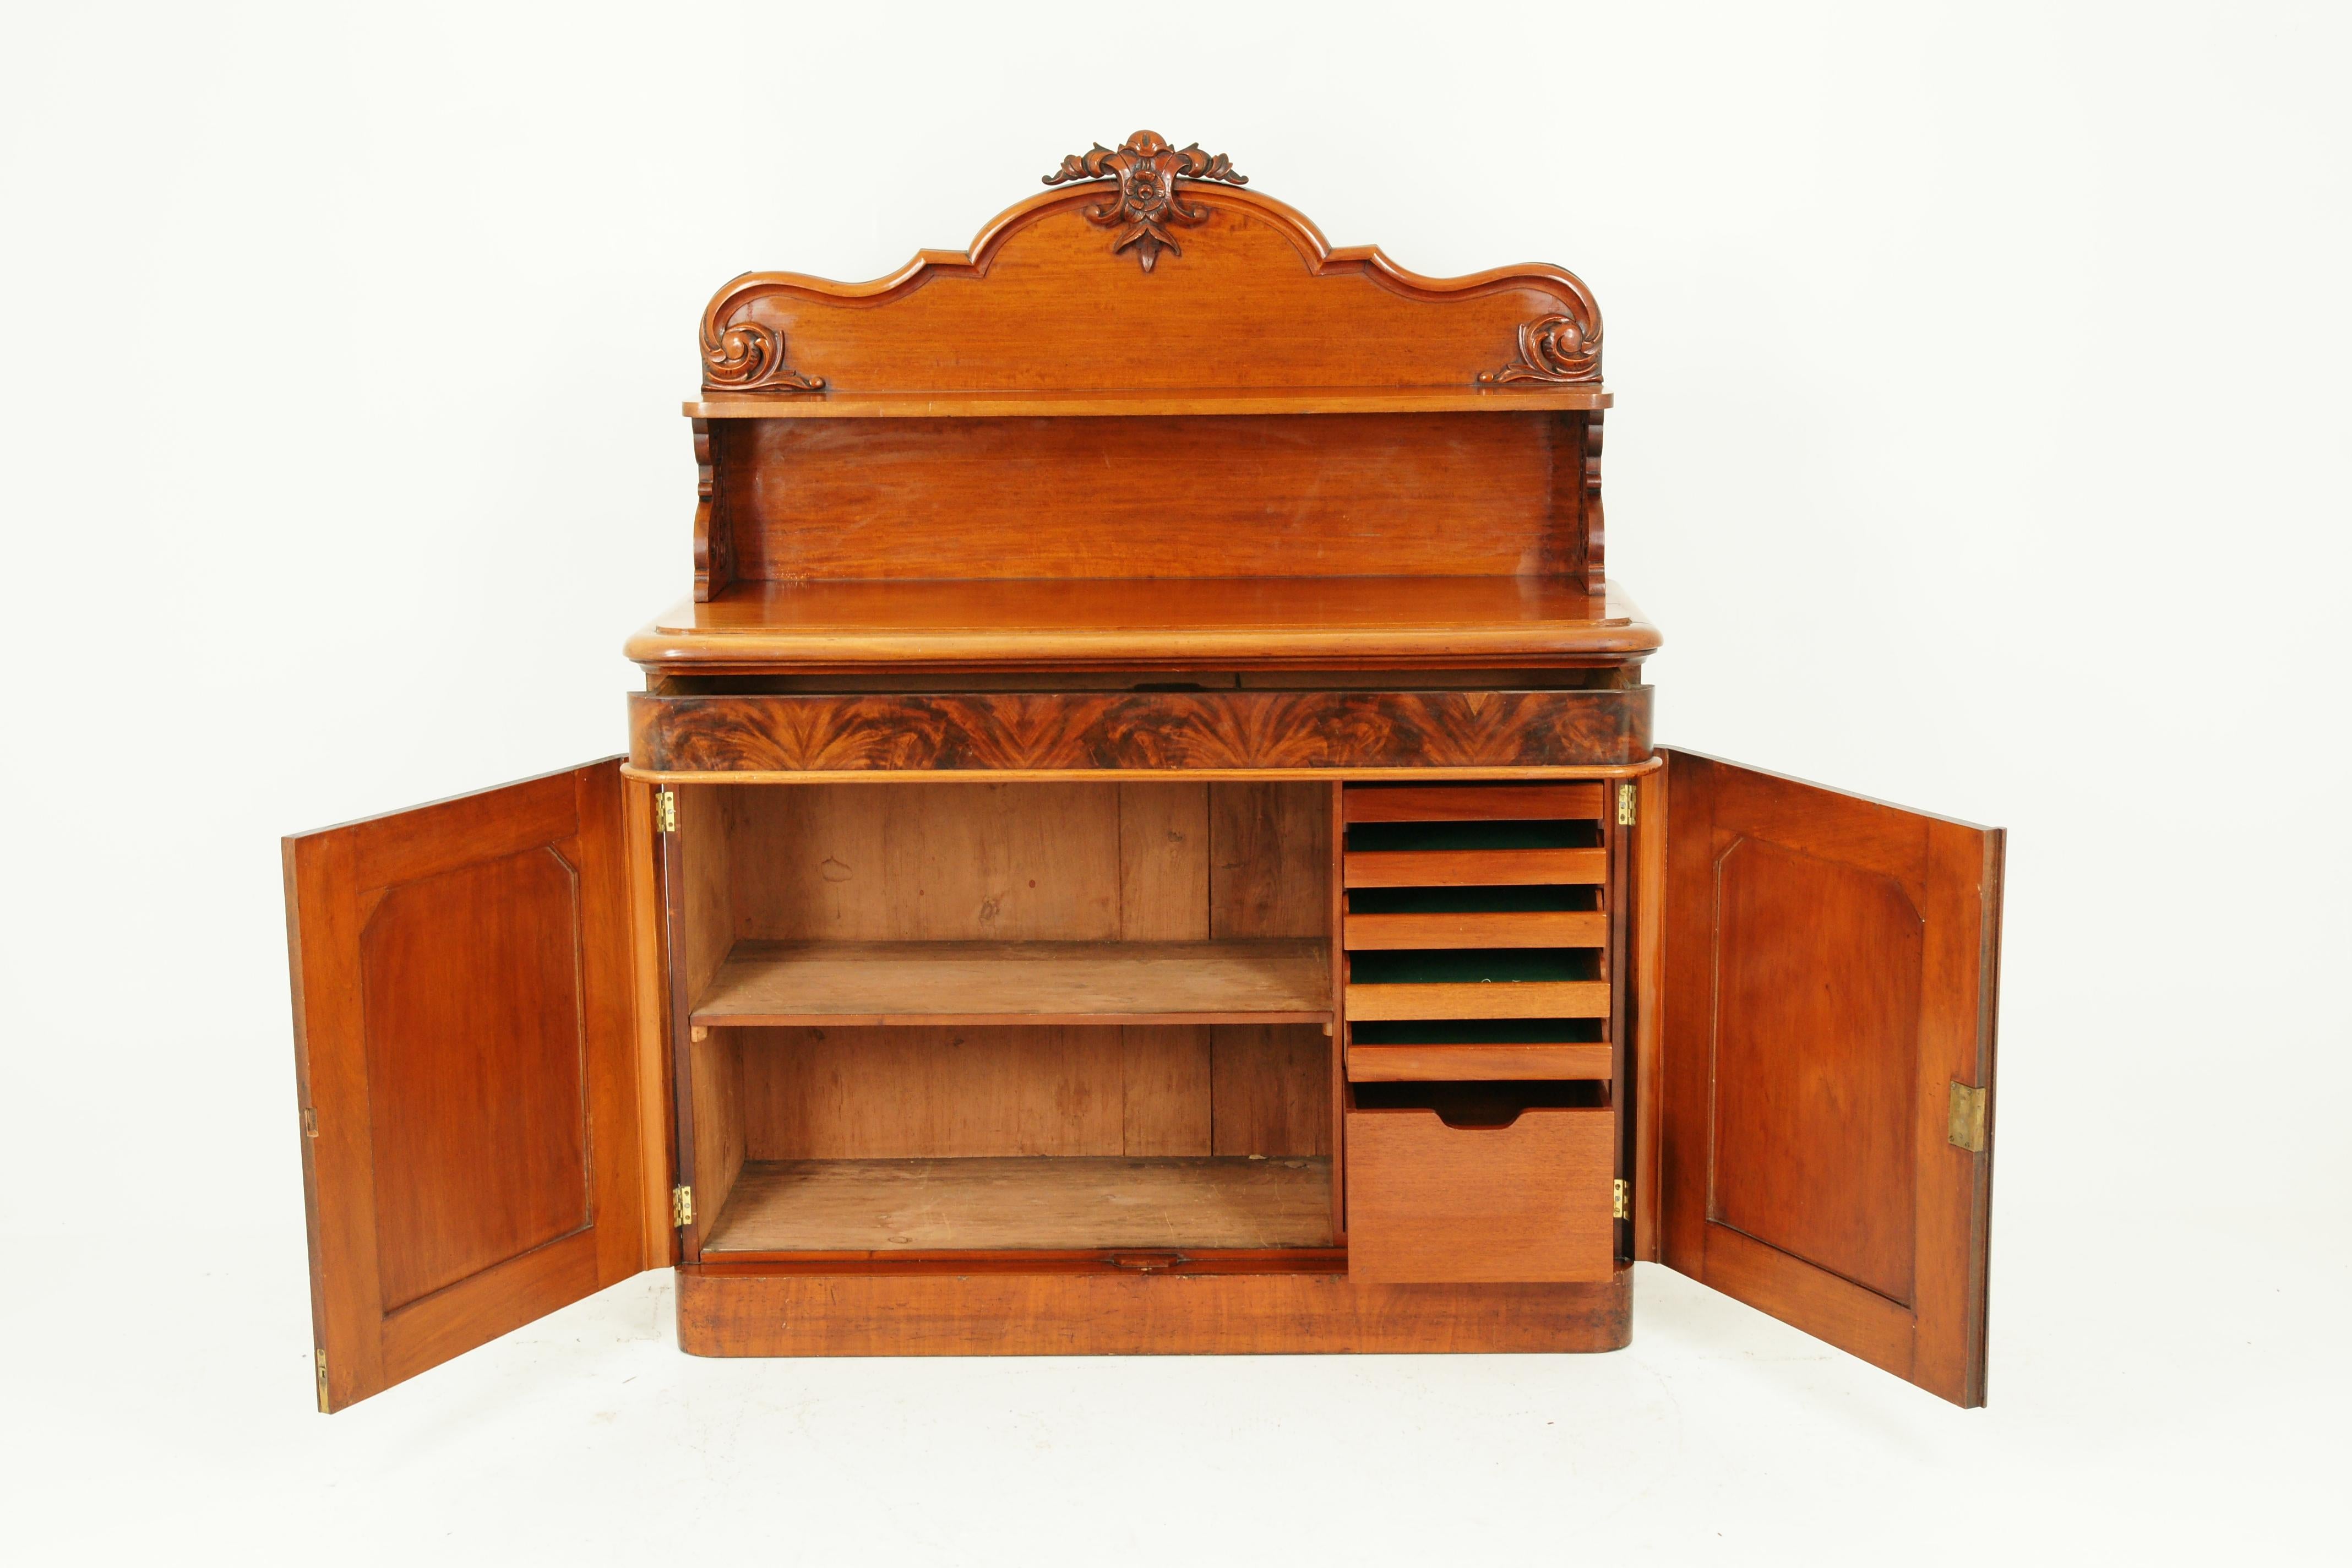 Antique walnut Chiffonier, walnut sideboard, Victorian, Scotland 1870, Antique Furniture, B1597 

Scotland, 1870
Shaped carved back
Single display shelf
Supported by scroll supports
Below with one long drawer
Two paneled cupboard doors
Open to